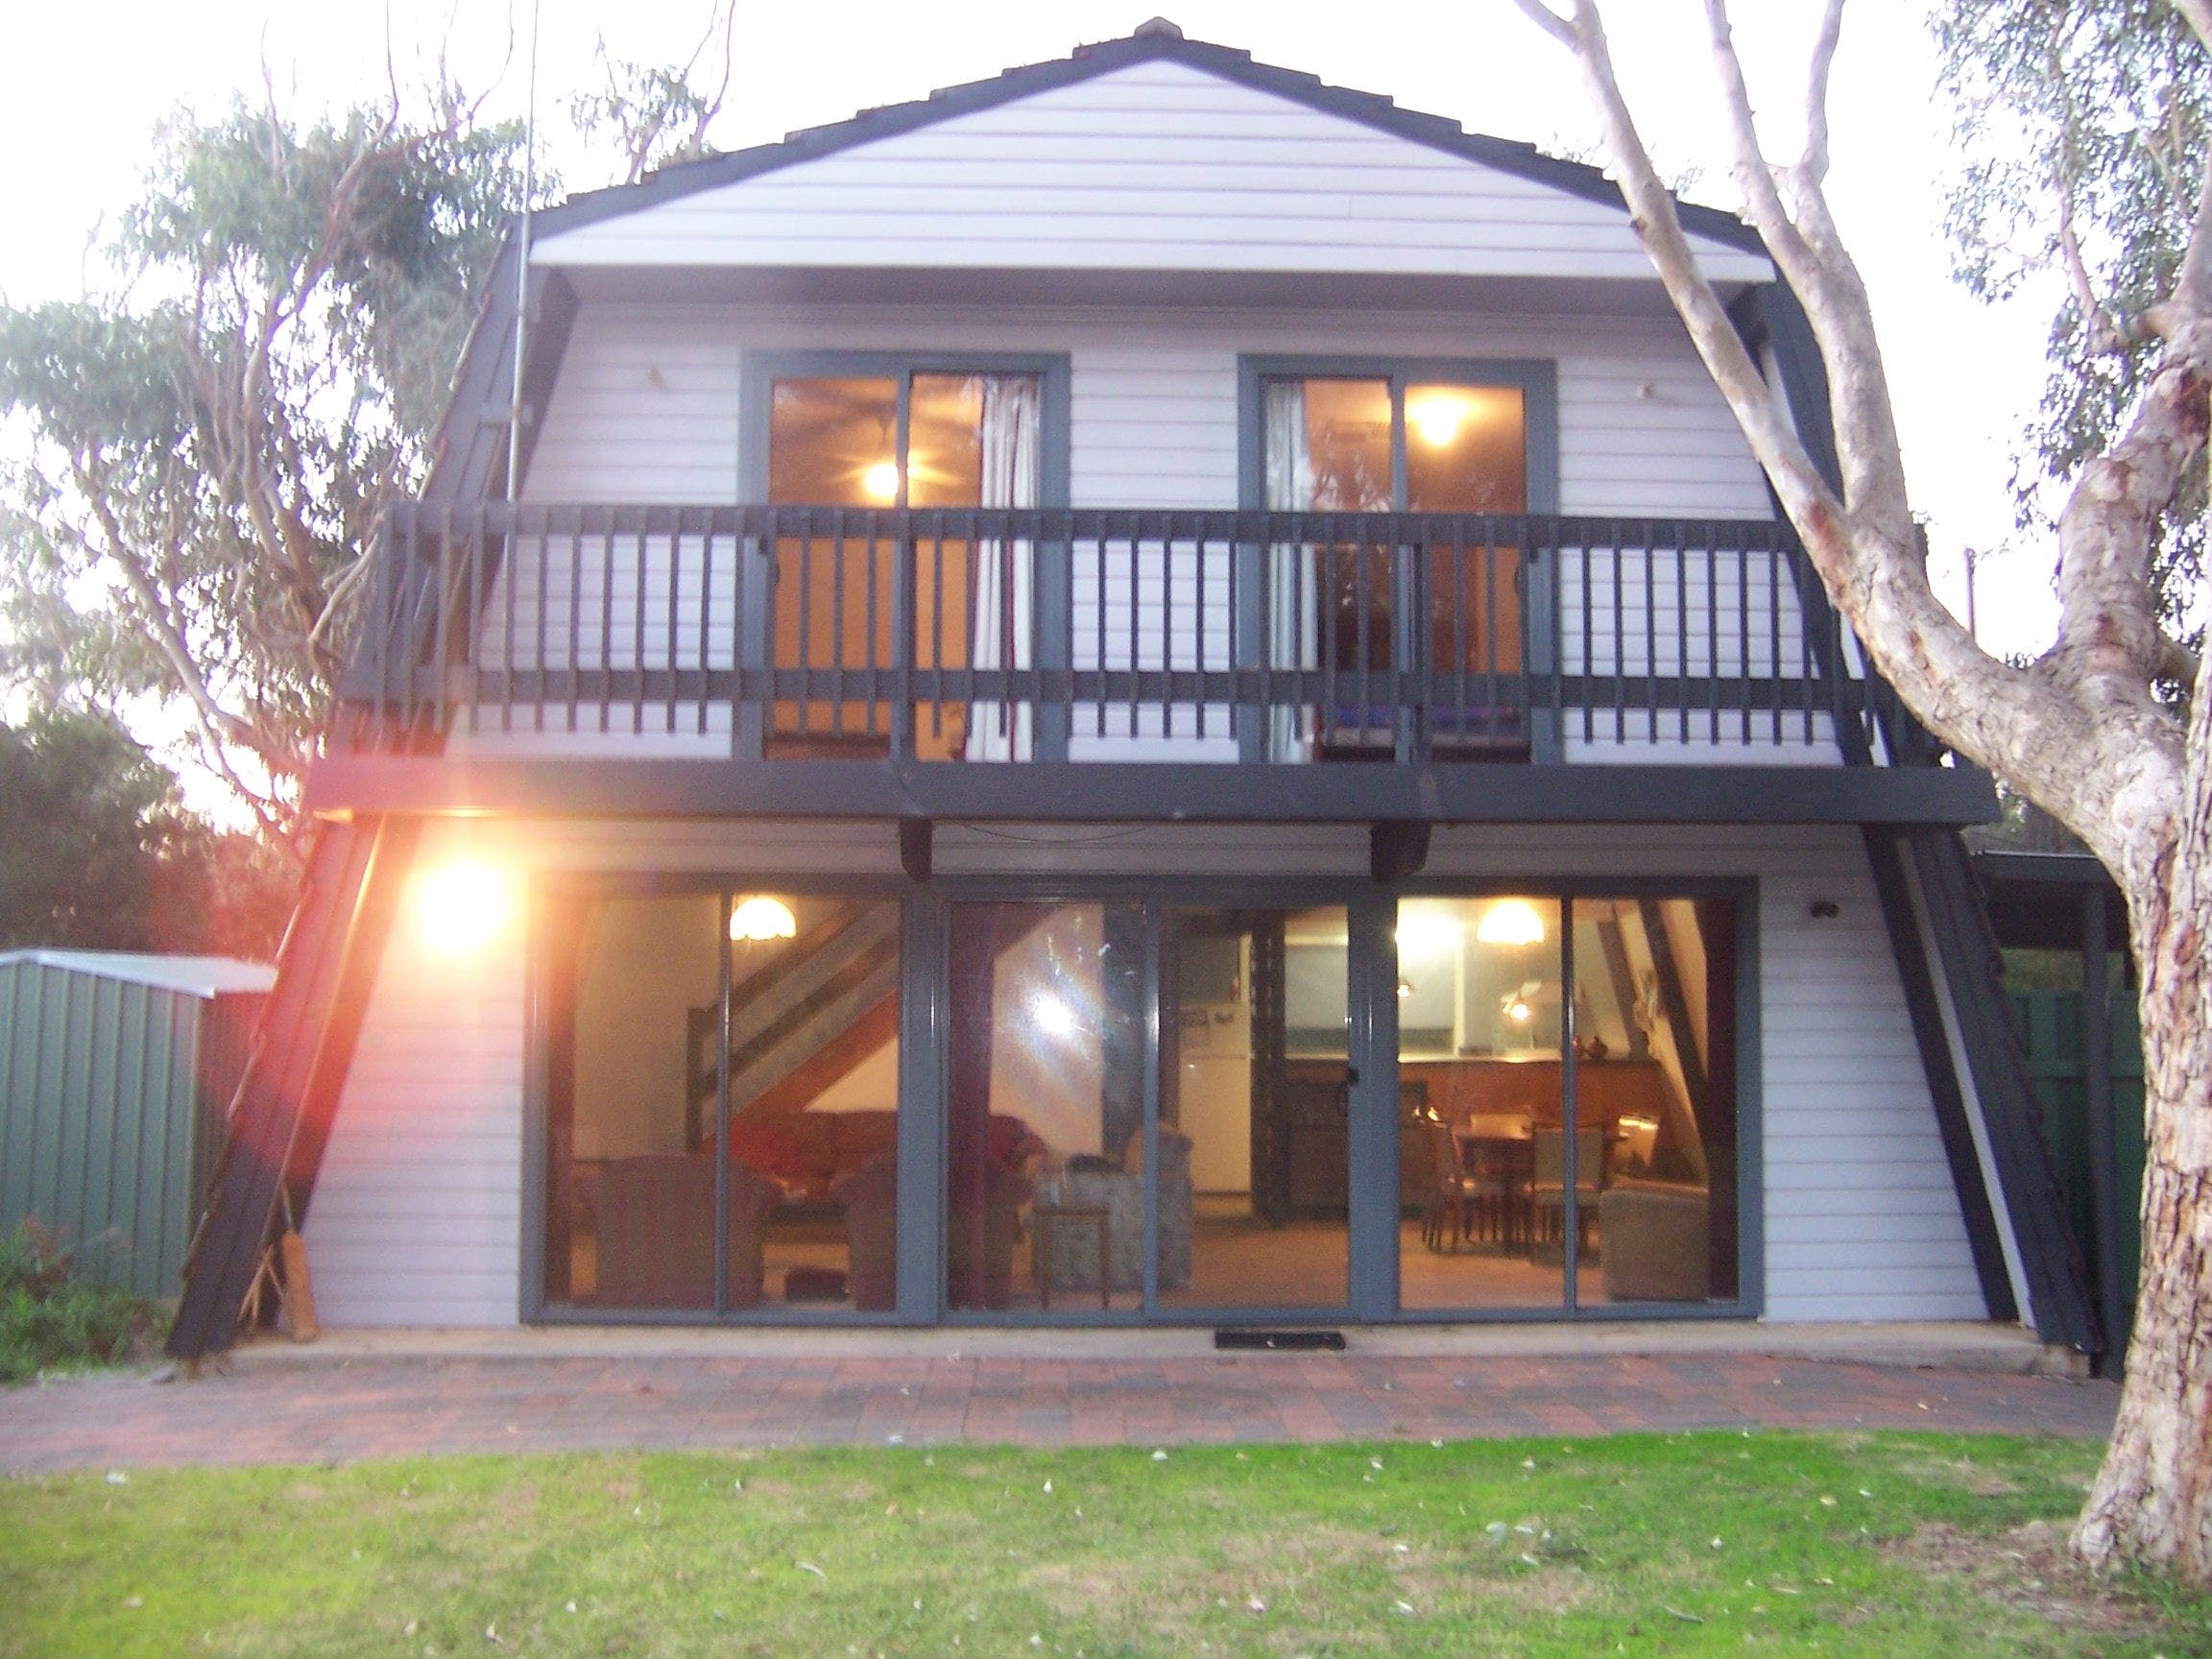 Century 21 SouthCoast Pink Gums - Dalby Accommodation